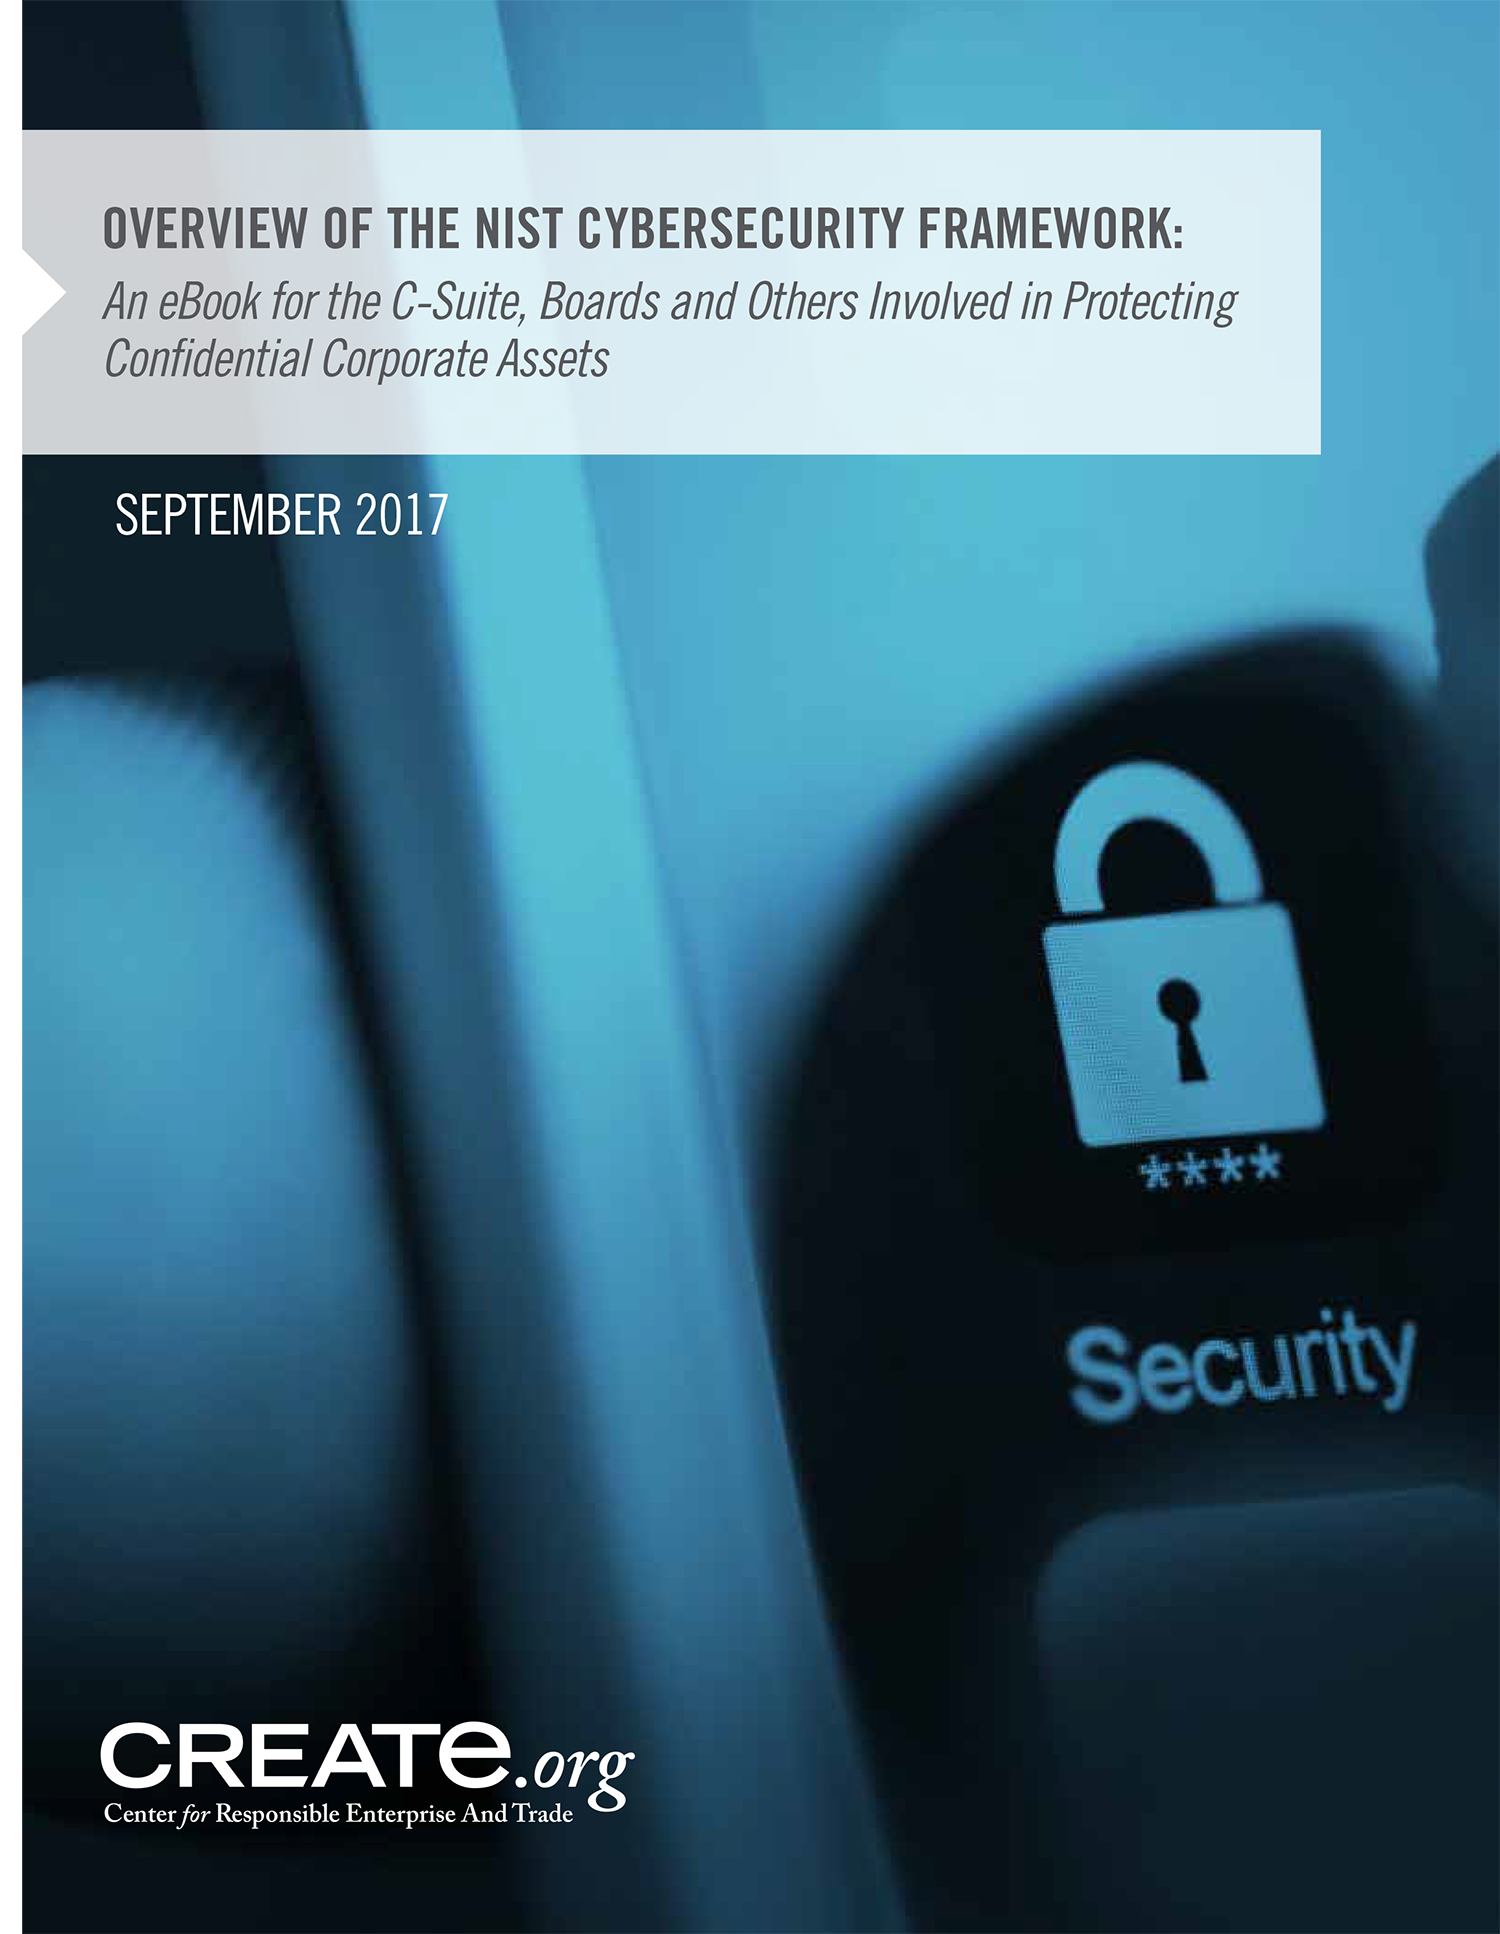 CREATe.org eBook - Overview of the NIST Cybersecurity Framework